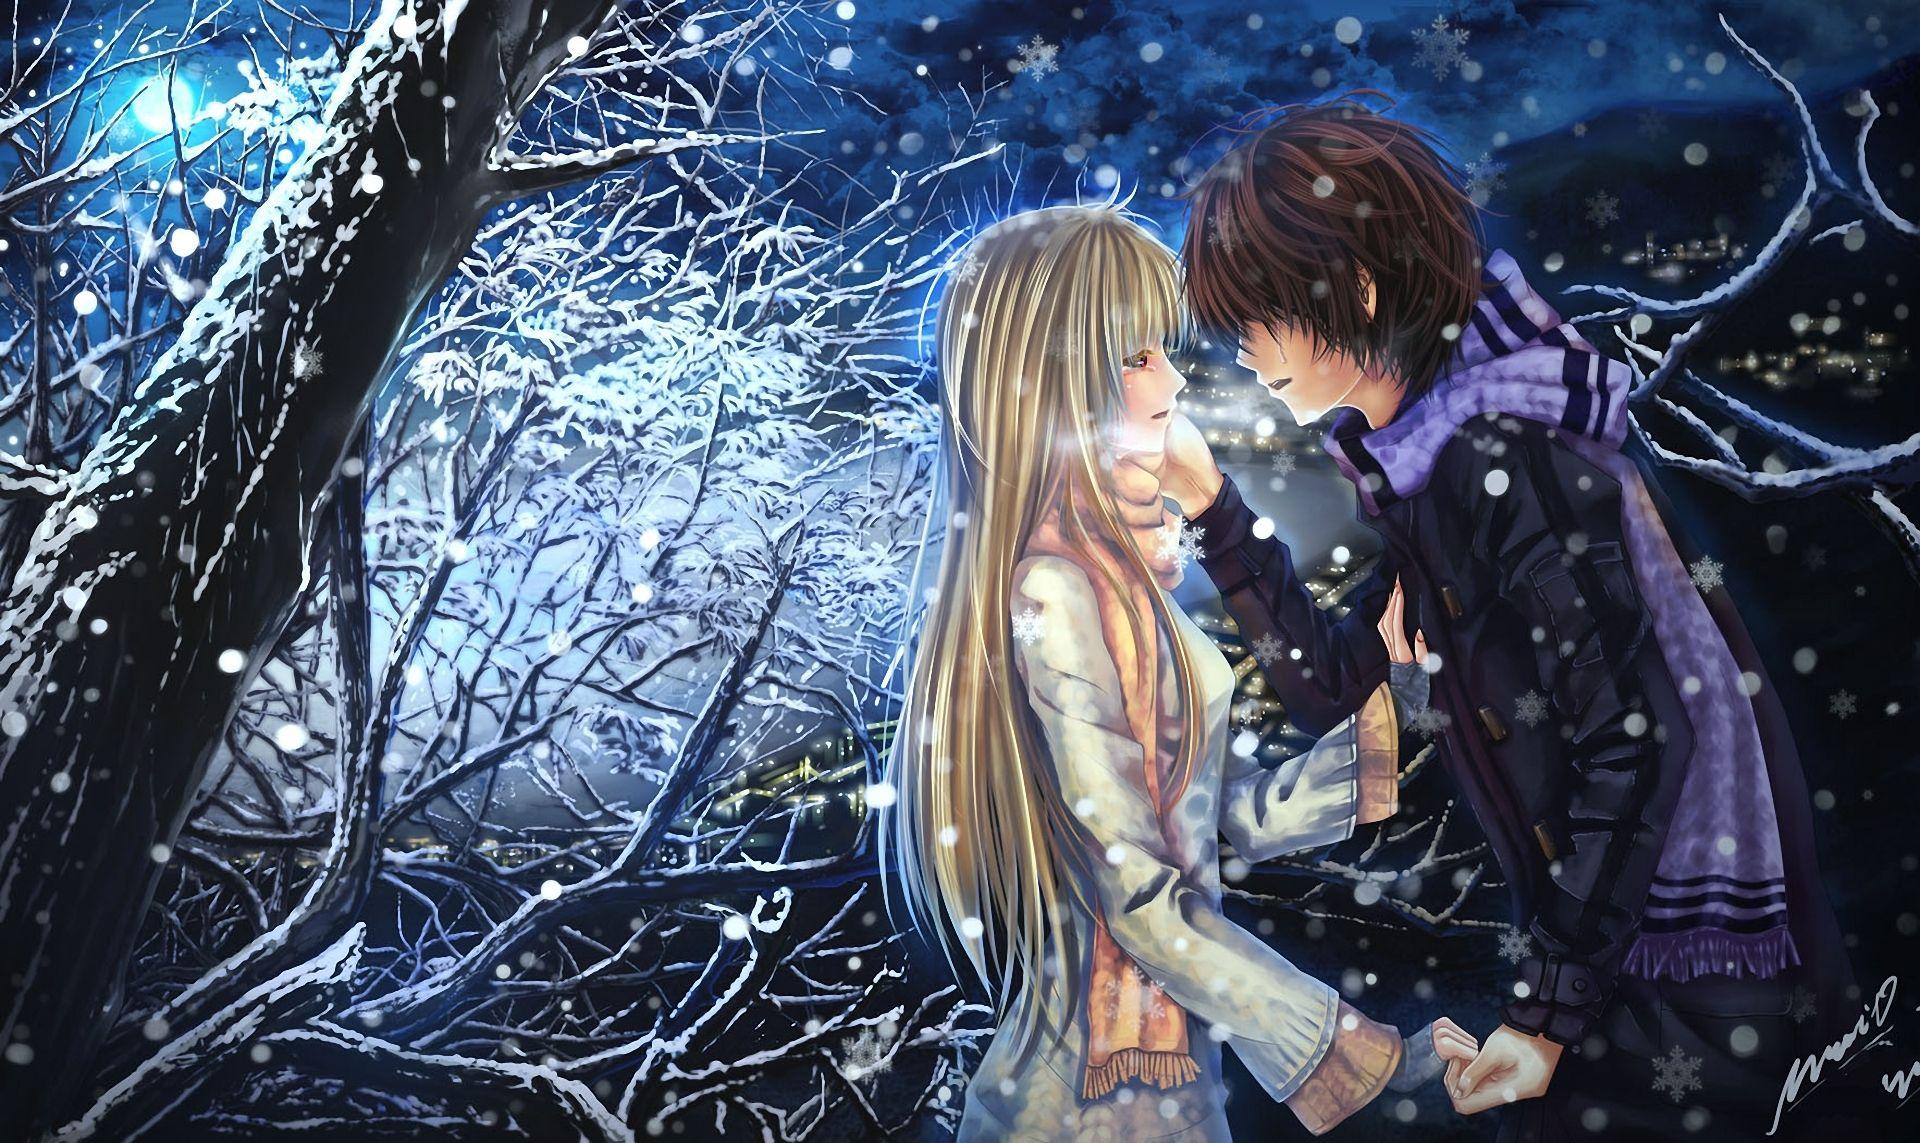 Wallpaper.wiki Cute Anime Couple Picture HD PIC WPE0010862